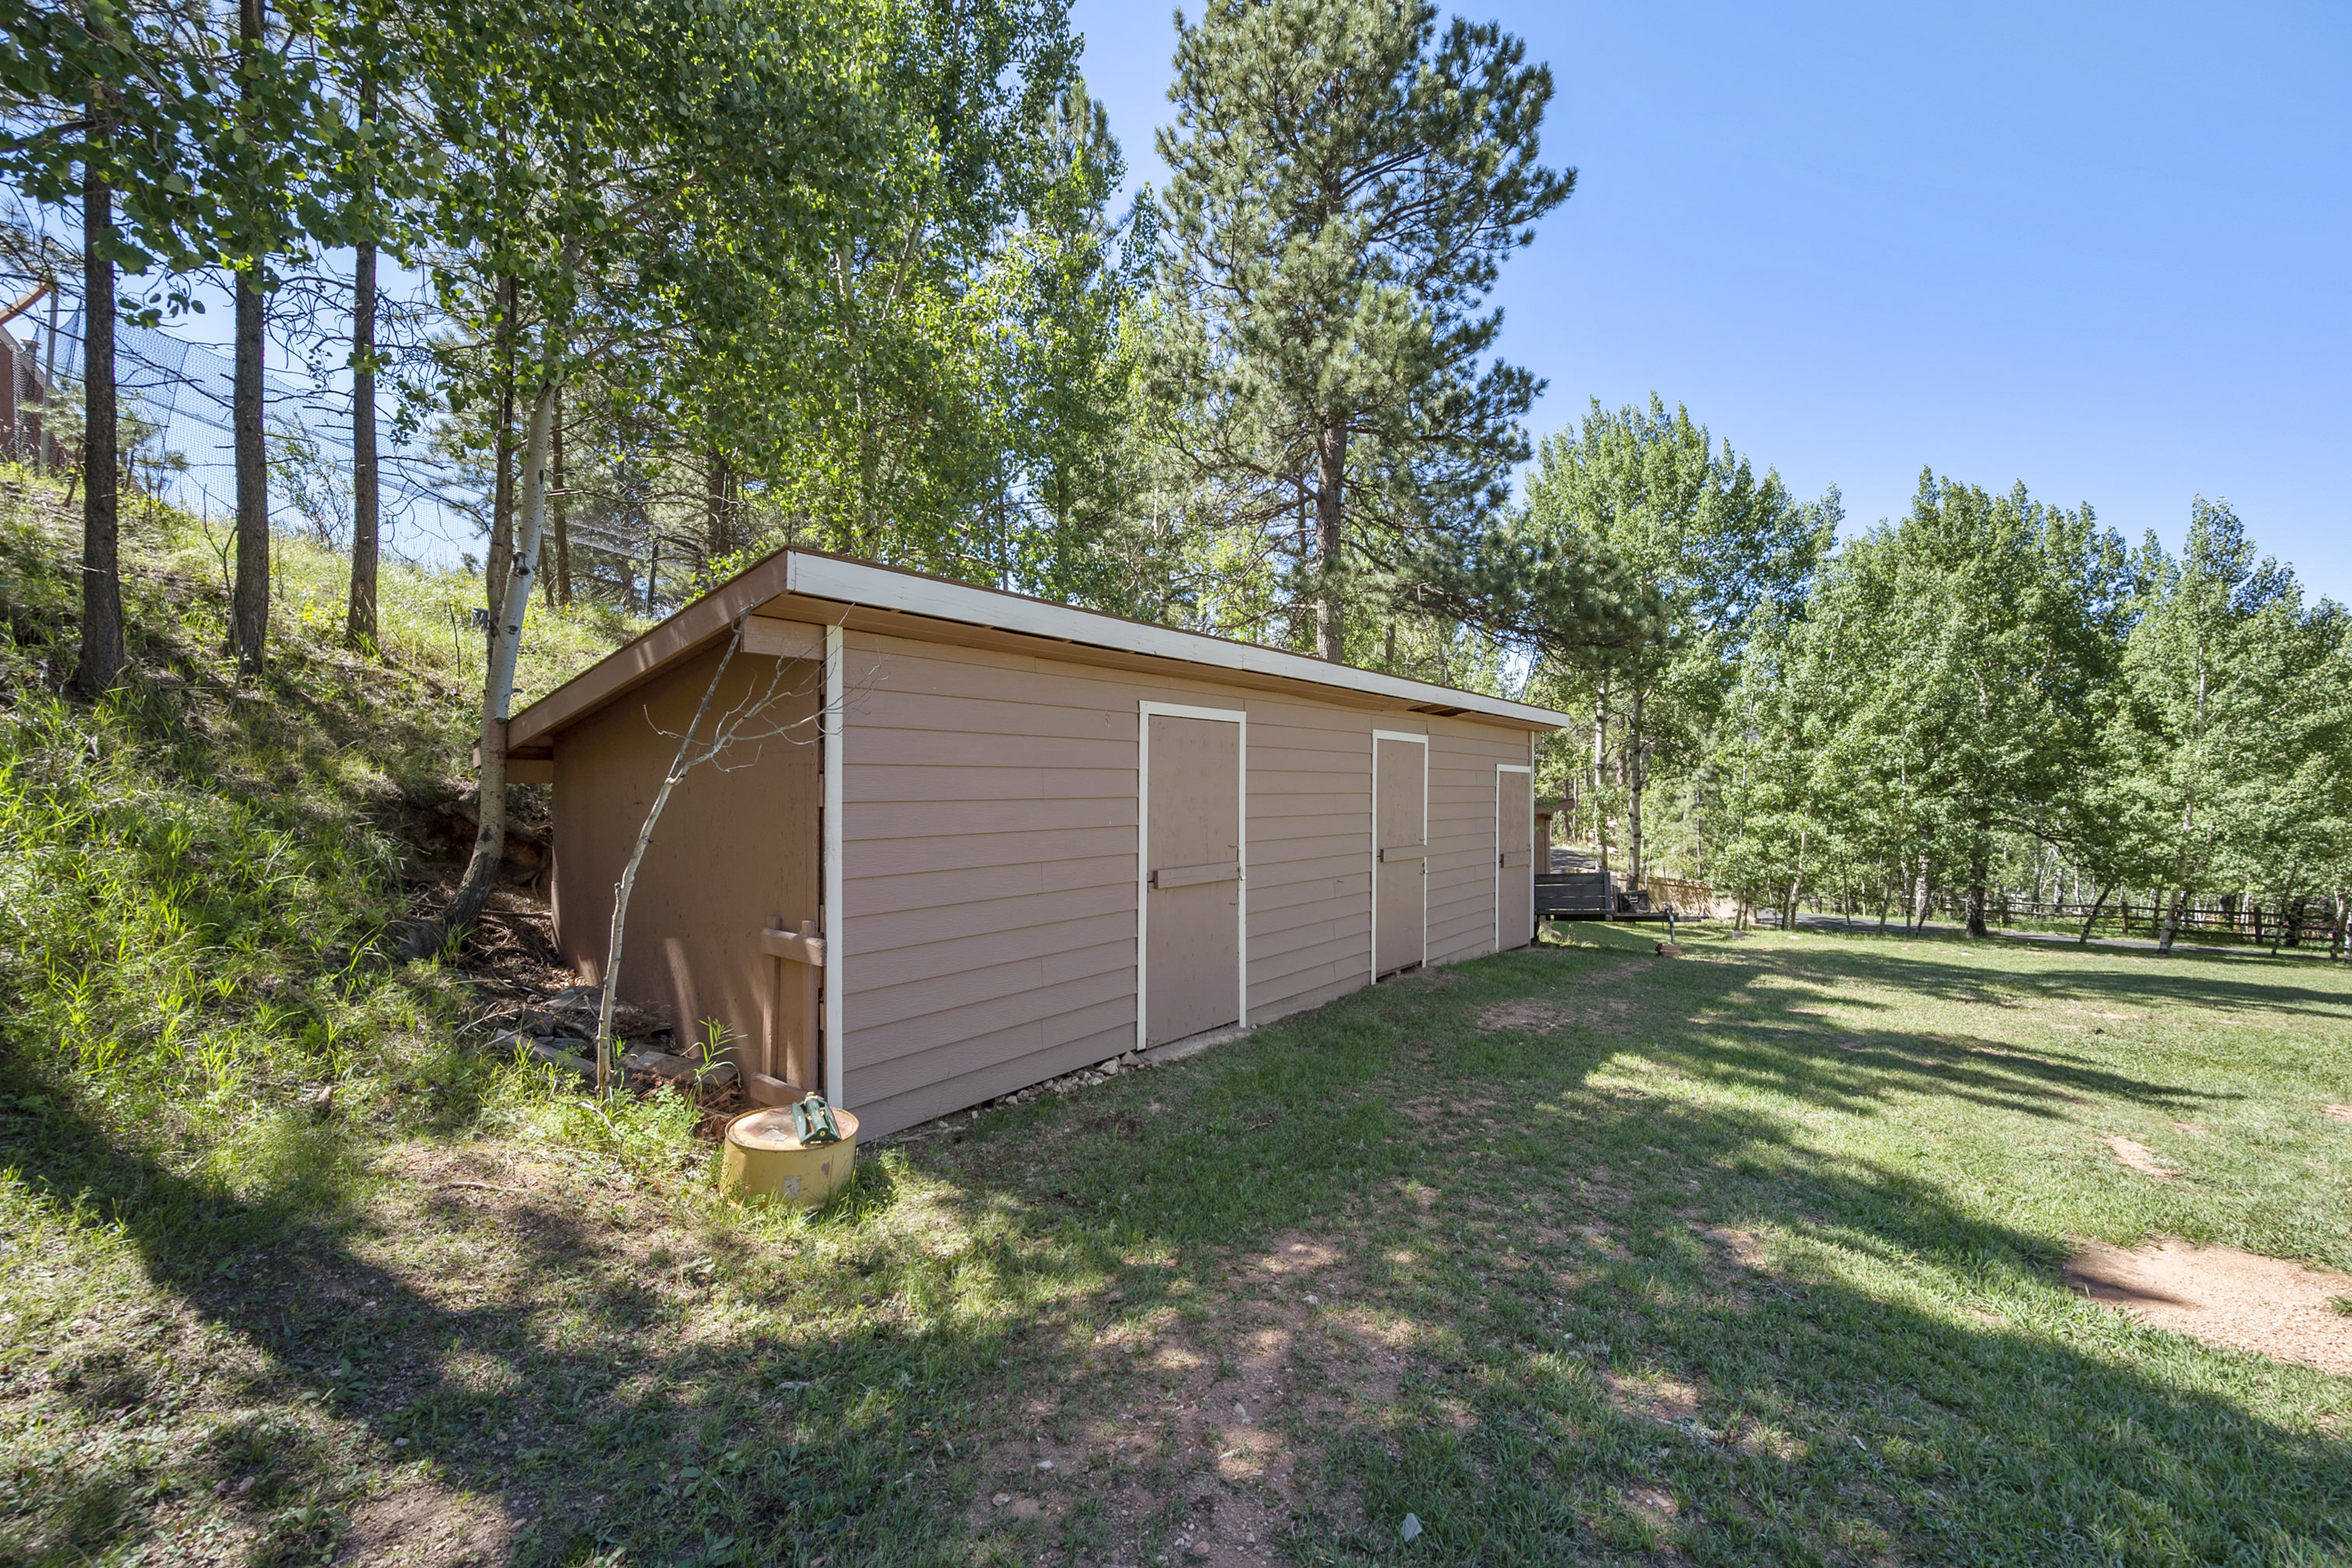 135 Sunrise Court, Woodland Park, Colorado, 80863, United States, 3 Bedrooms Bedrooms, ,2 BathroomsBathrooms,Residential,For Sale,135 Sunrise Court,1440540